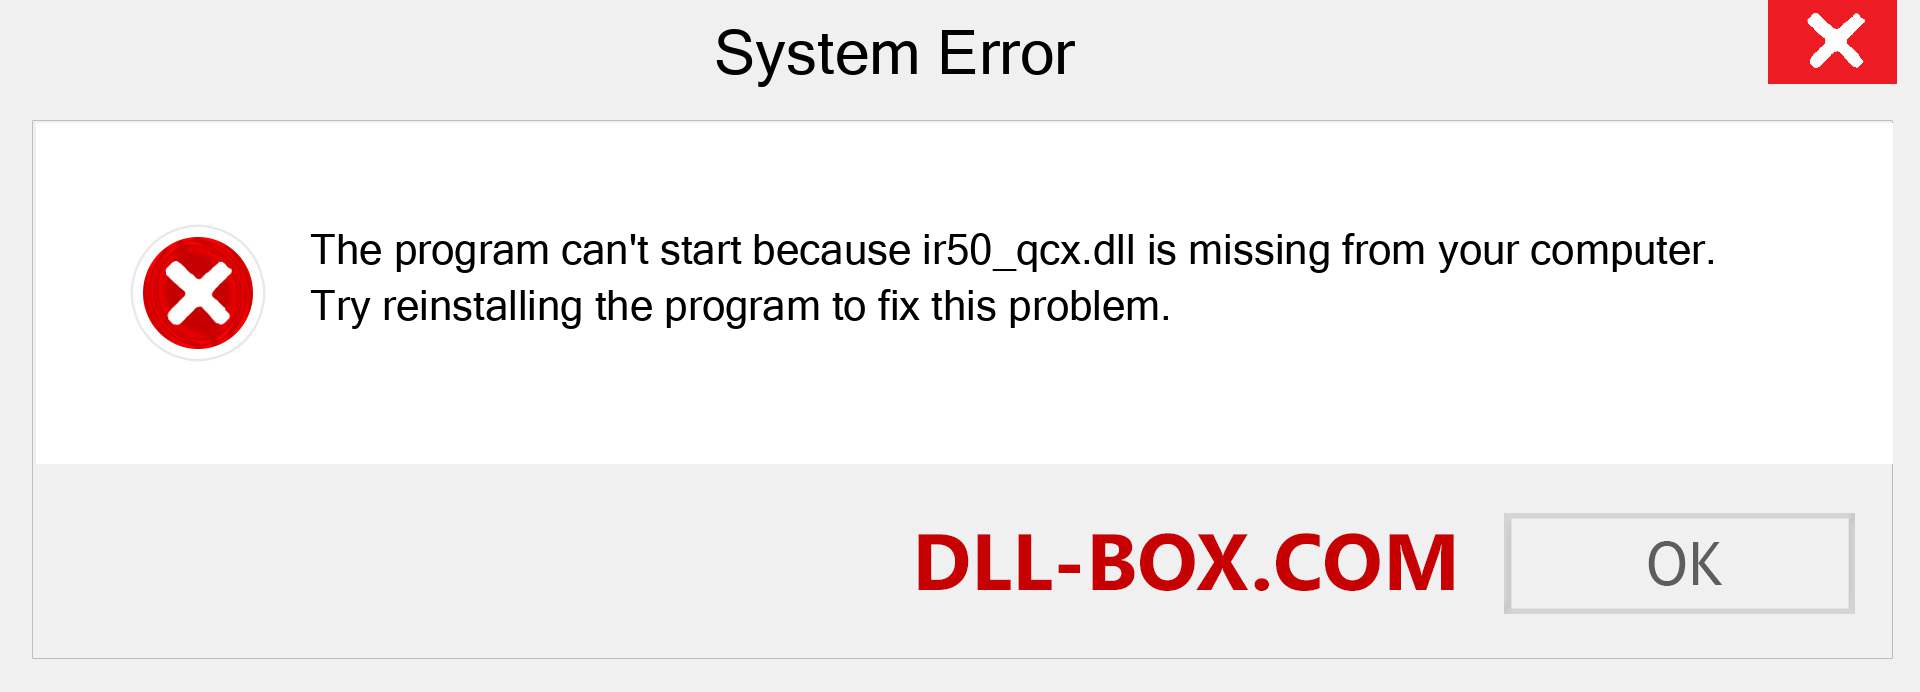  ir50_qcx.dll file is missing?. Download for Windows 7, 8, 10 - Fix  ir50_qcx dll Missing Error on Windows, photos, images